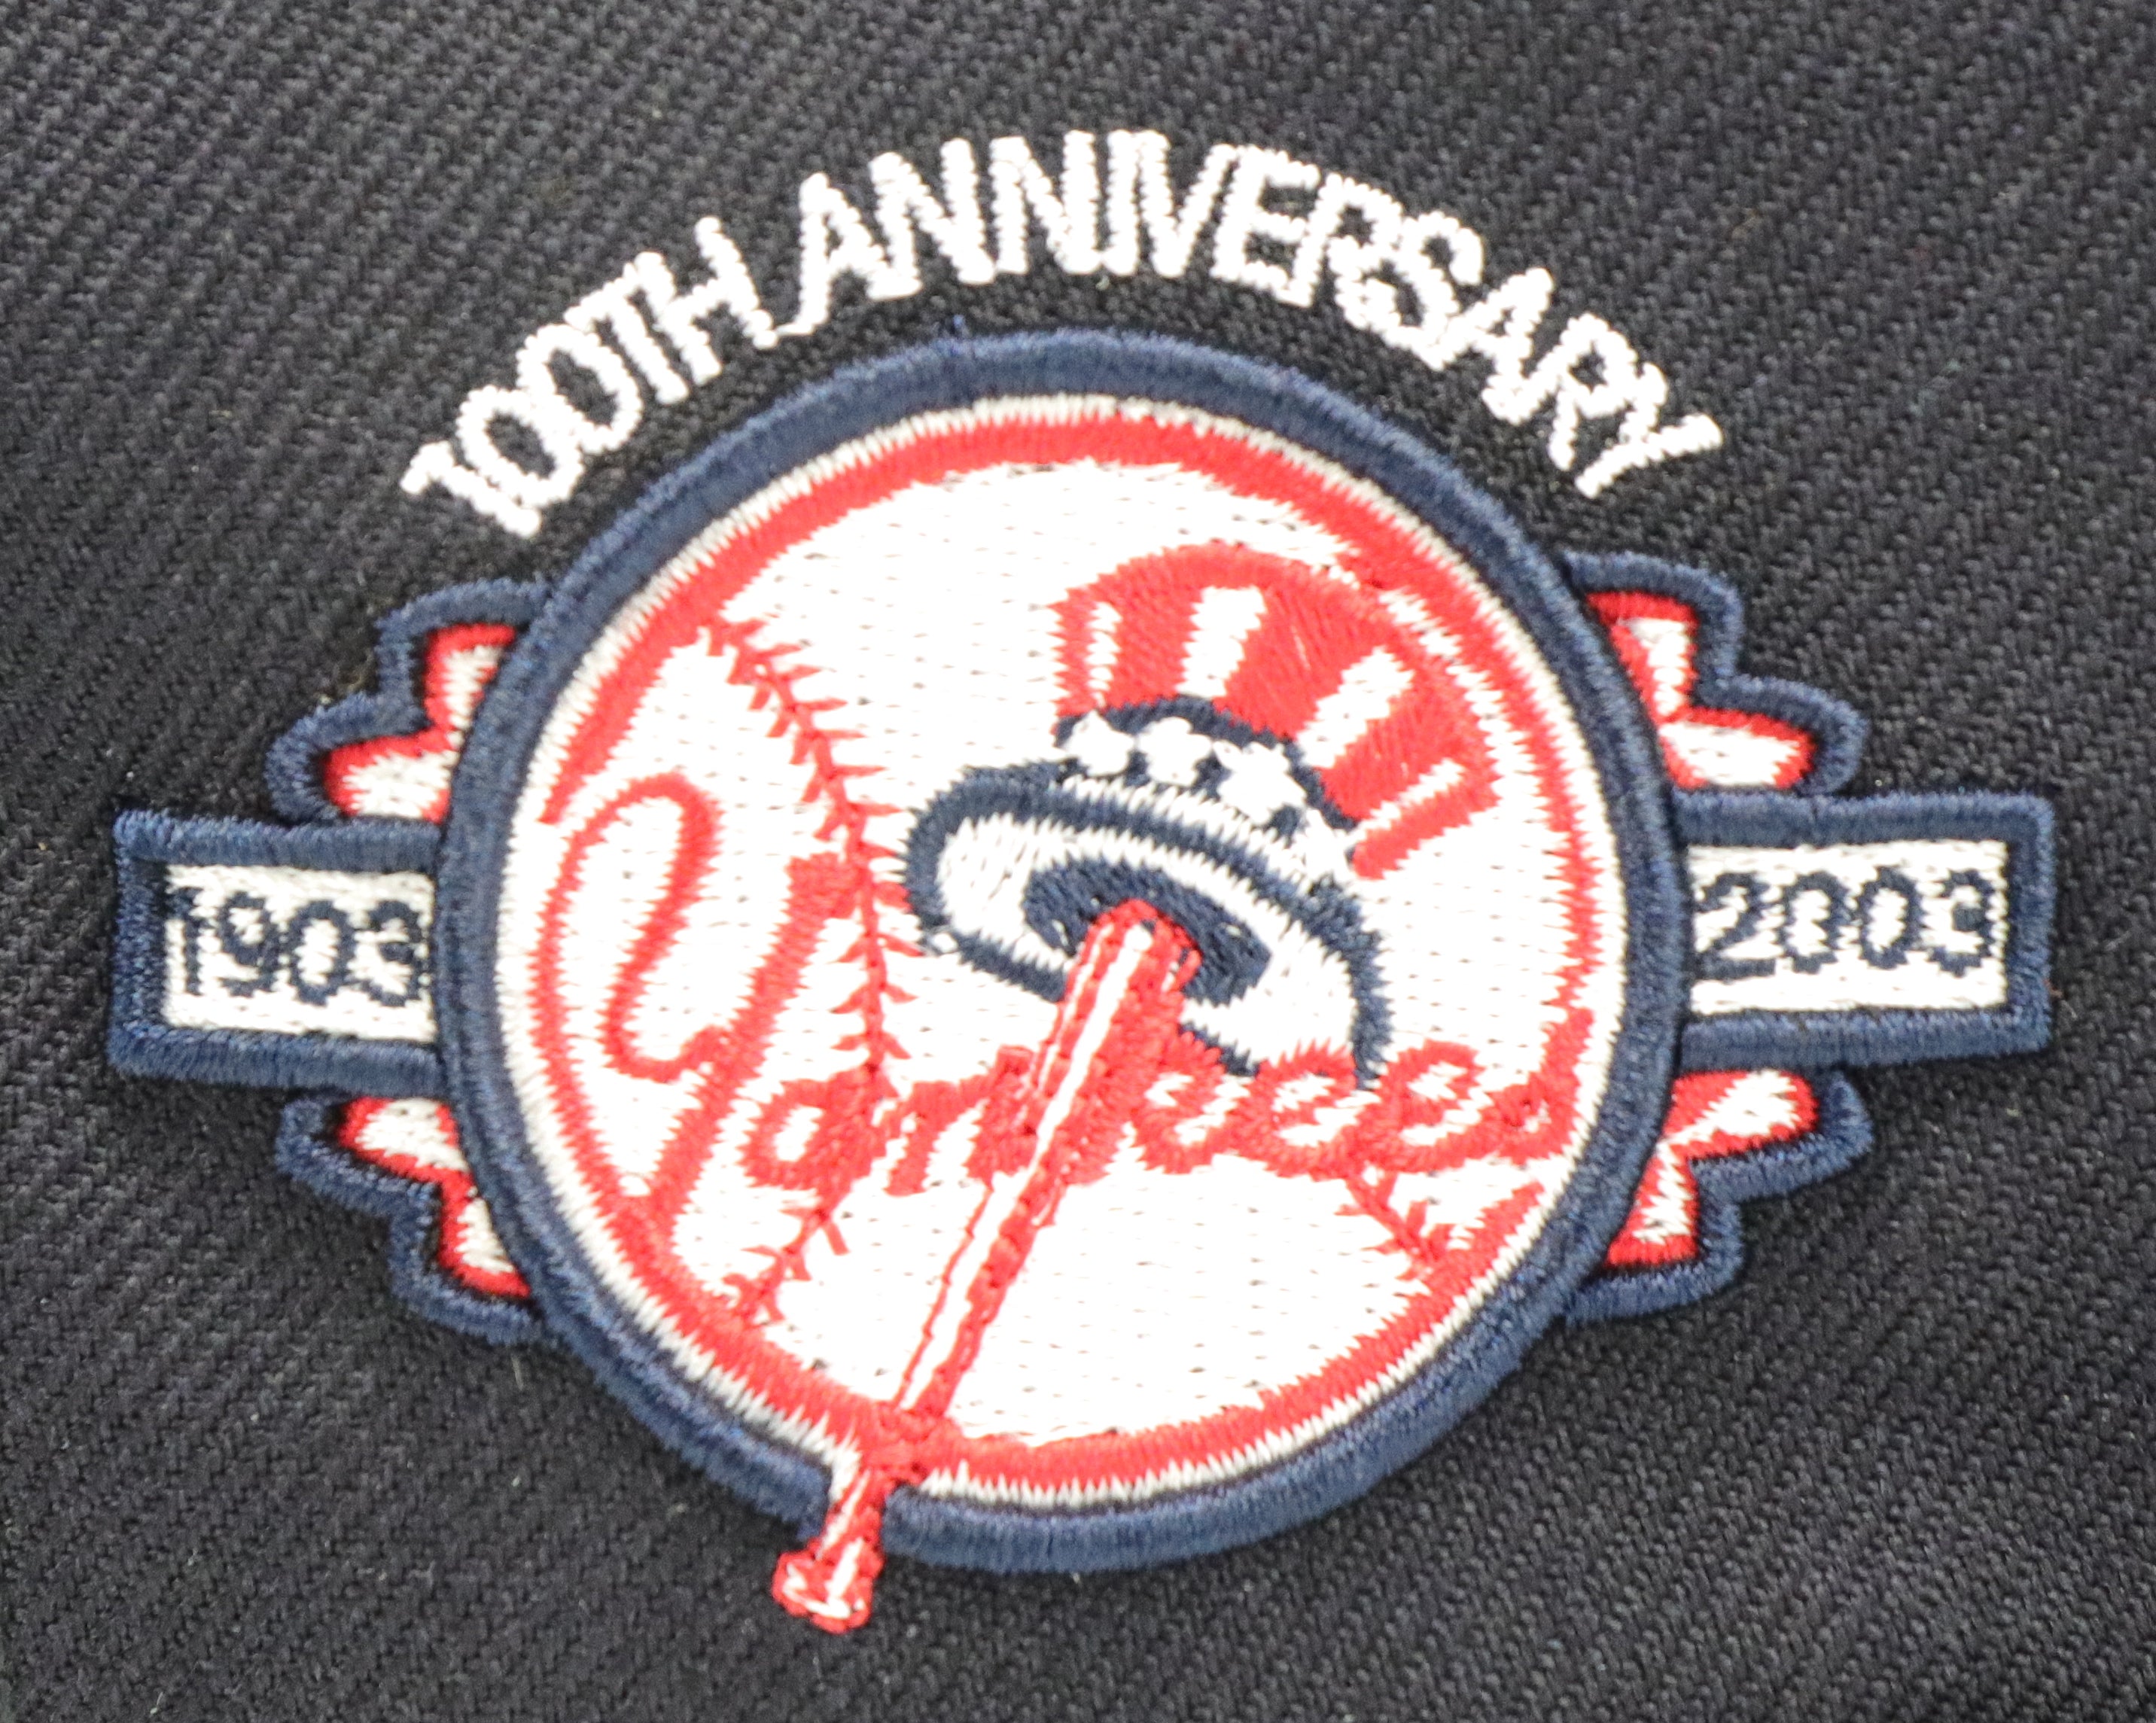 NEW YORK YANKEES "TOP HAT LOGO" (100TH ANN ) NEW ERA 59FIFTY FITTED (GREY UNDER UNDER VISOR)